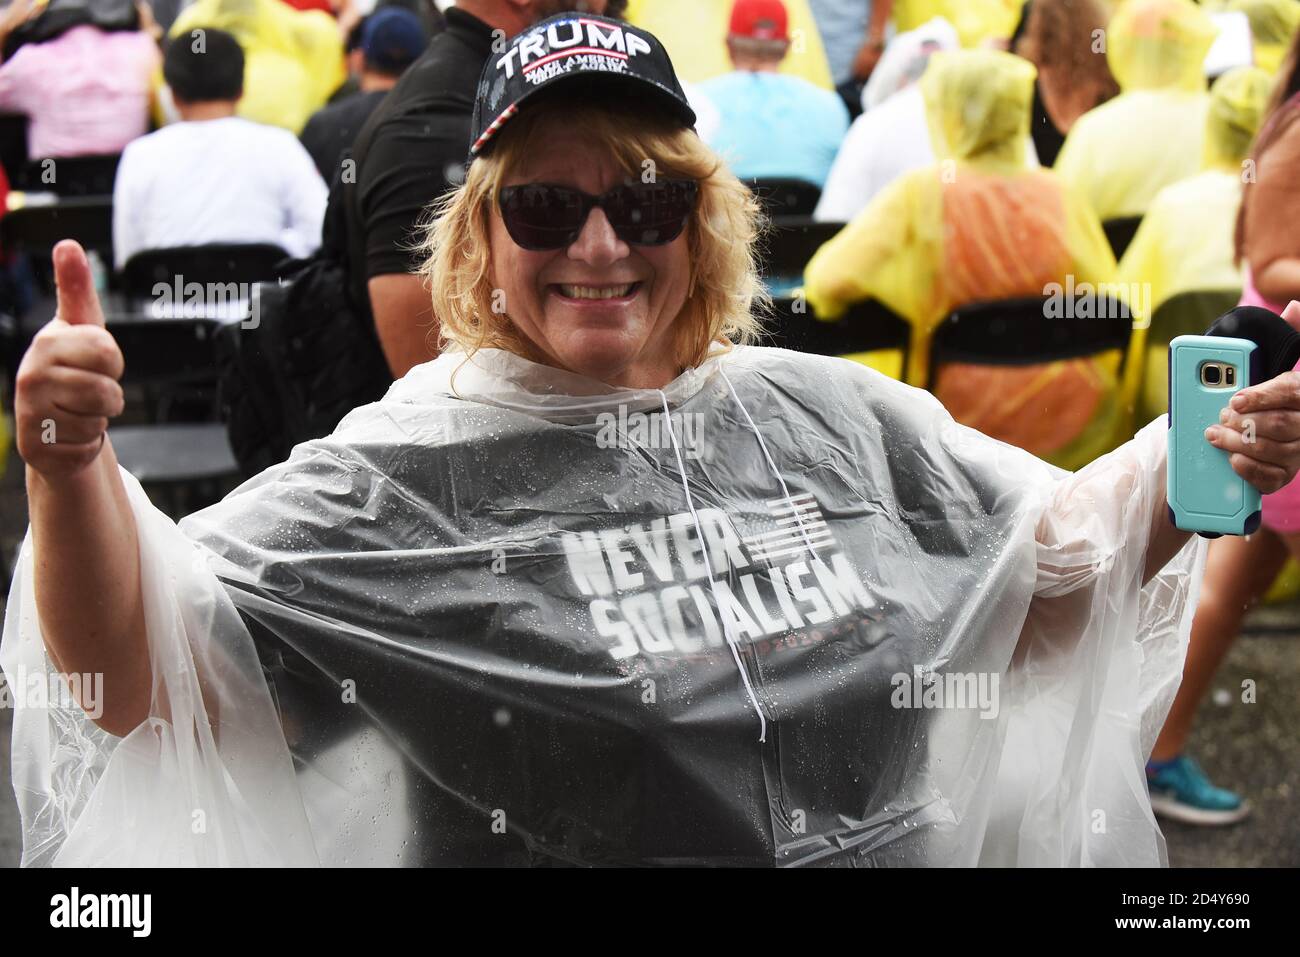 Orlando, Florida, USA. October 11, 2020 - Orlando, Florida, United States - A woman wearing a Never Socialism t-shirt gives a thumbs up while waiting for Donald Trump Jr. to speak at a Fighters Against Socialism campaign rally in support of his father, U.S. President Donald Trump, on October 11, 2020 in Orlando, Florida. UFC fighter Jorge Masvidal also spoke at the rally. (Paul Hennessy/Alamy) Credit: Paul Hennessy/Alamy Live News Stock Photo